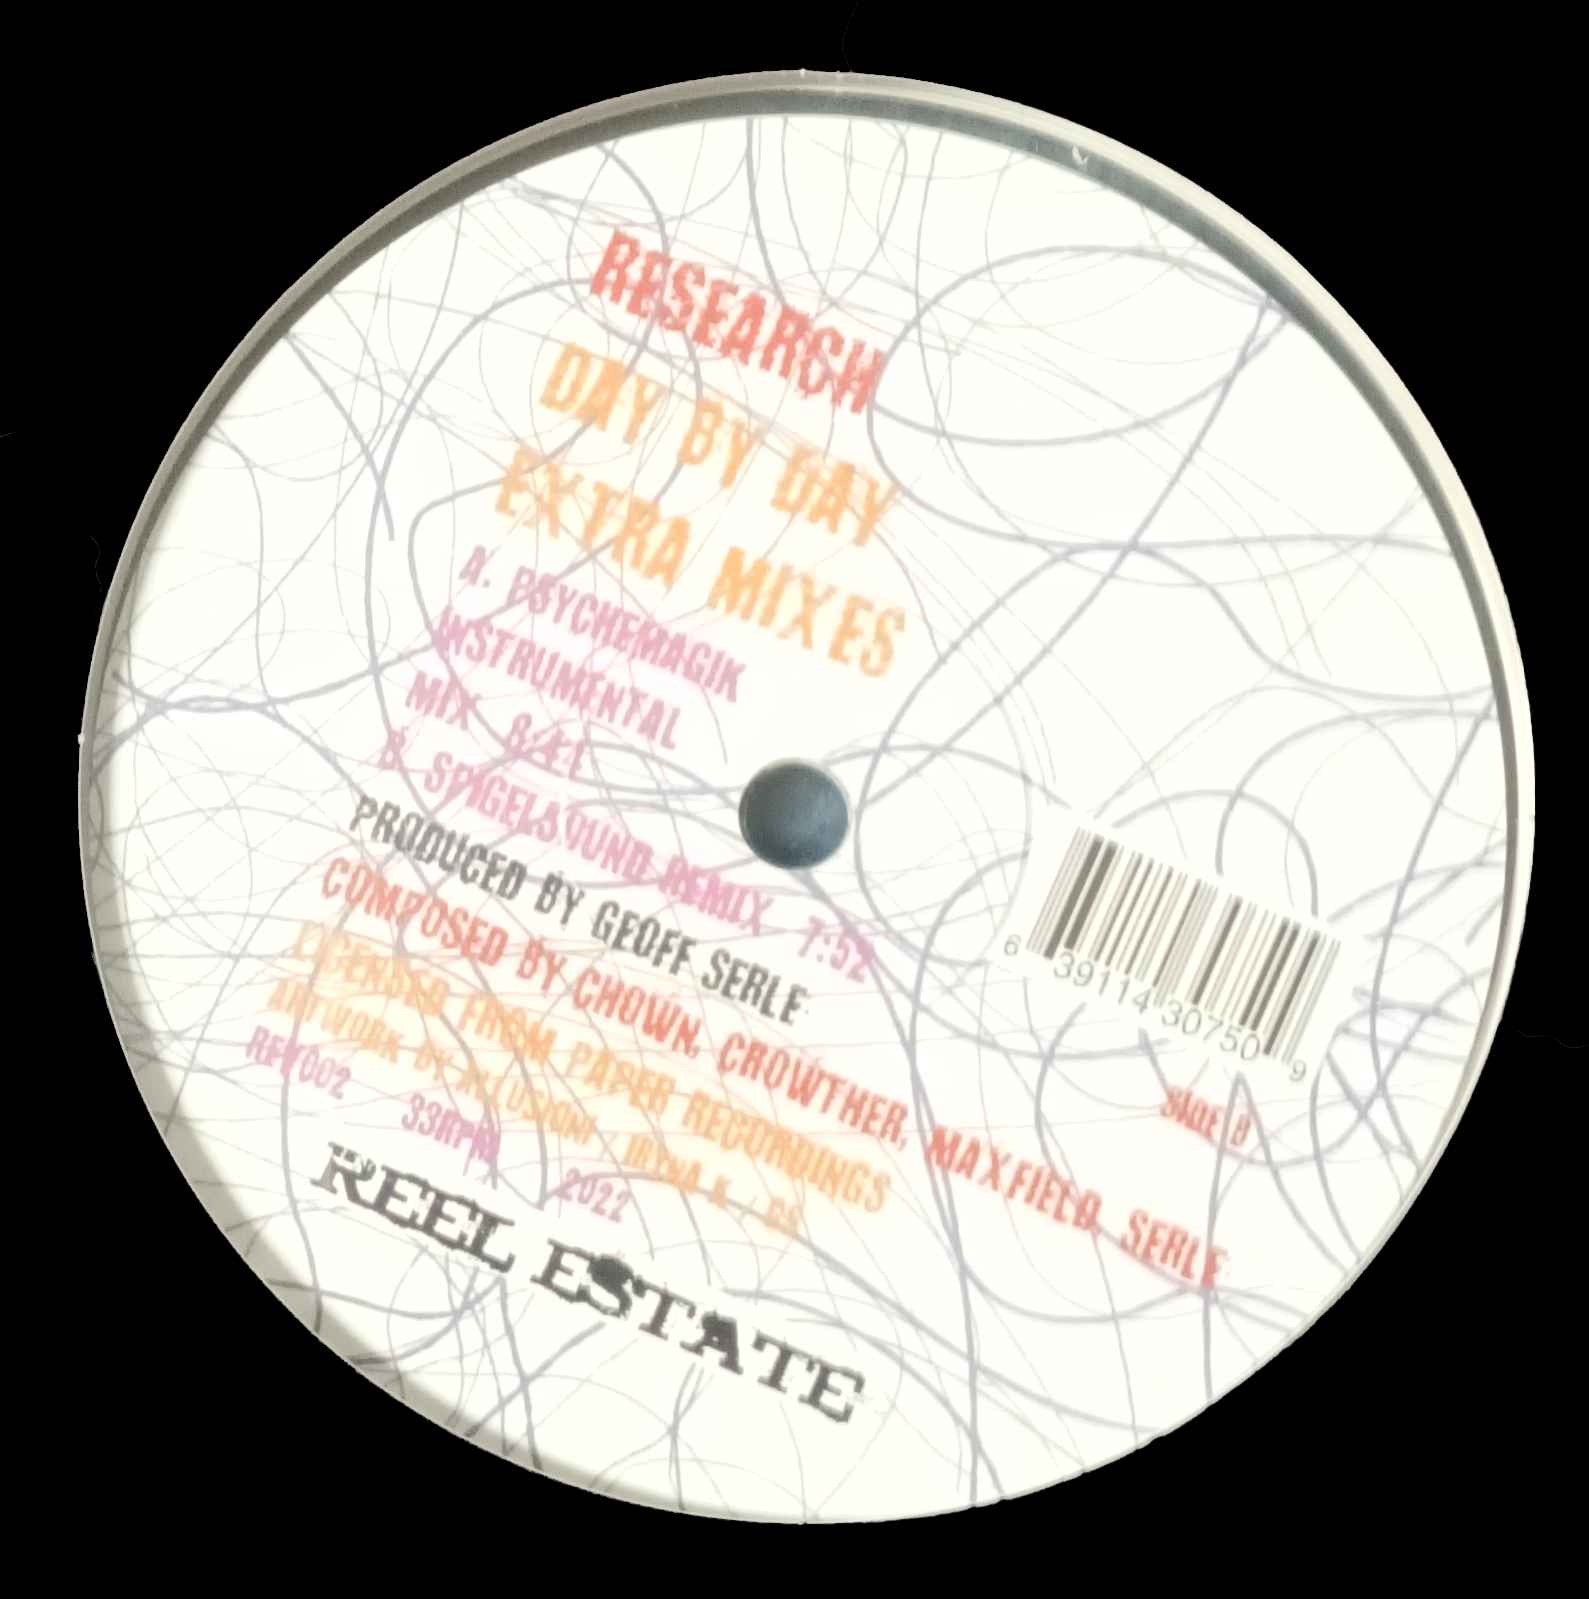 Research/DAY BY DAY (EXTRA MIXES) 12"